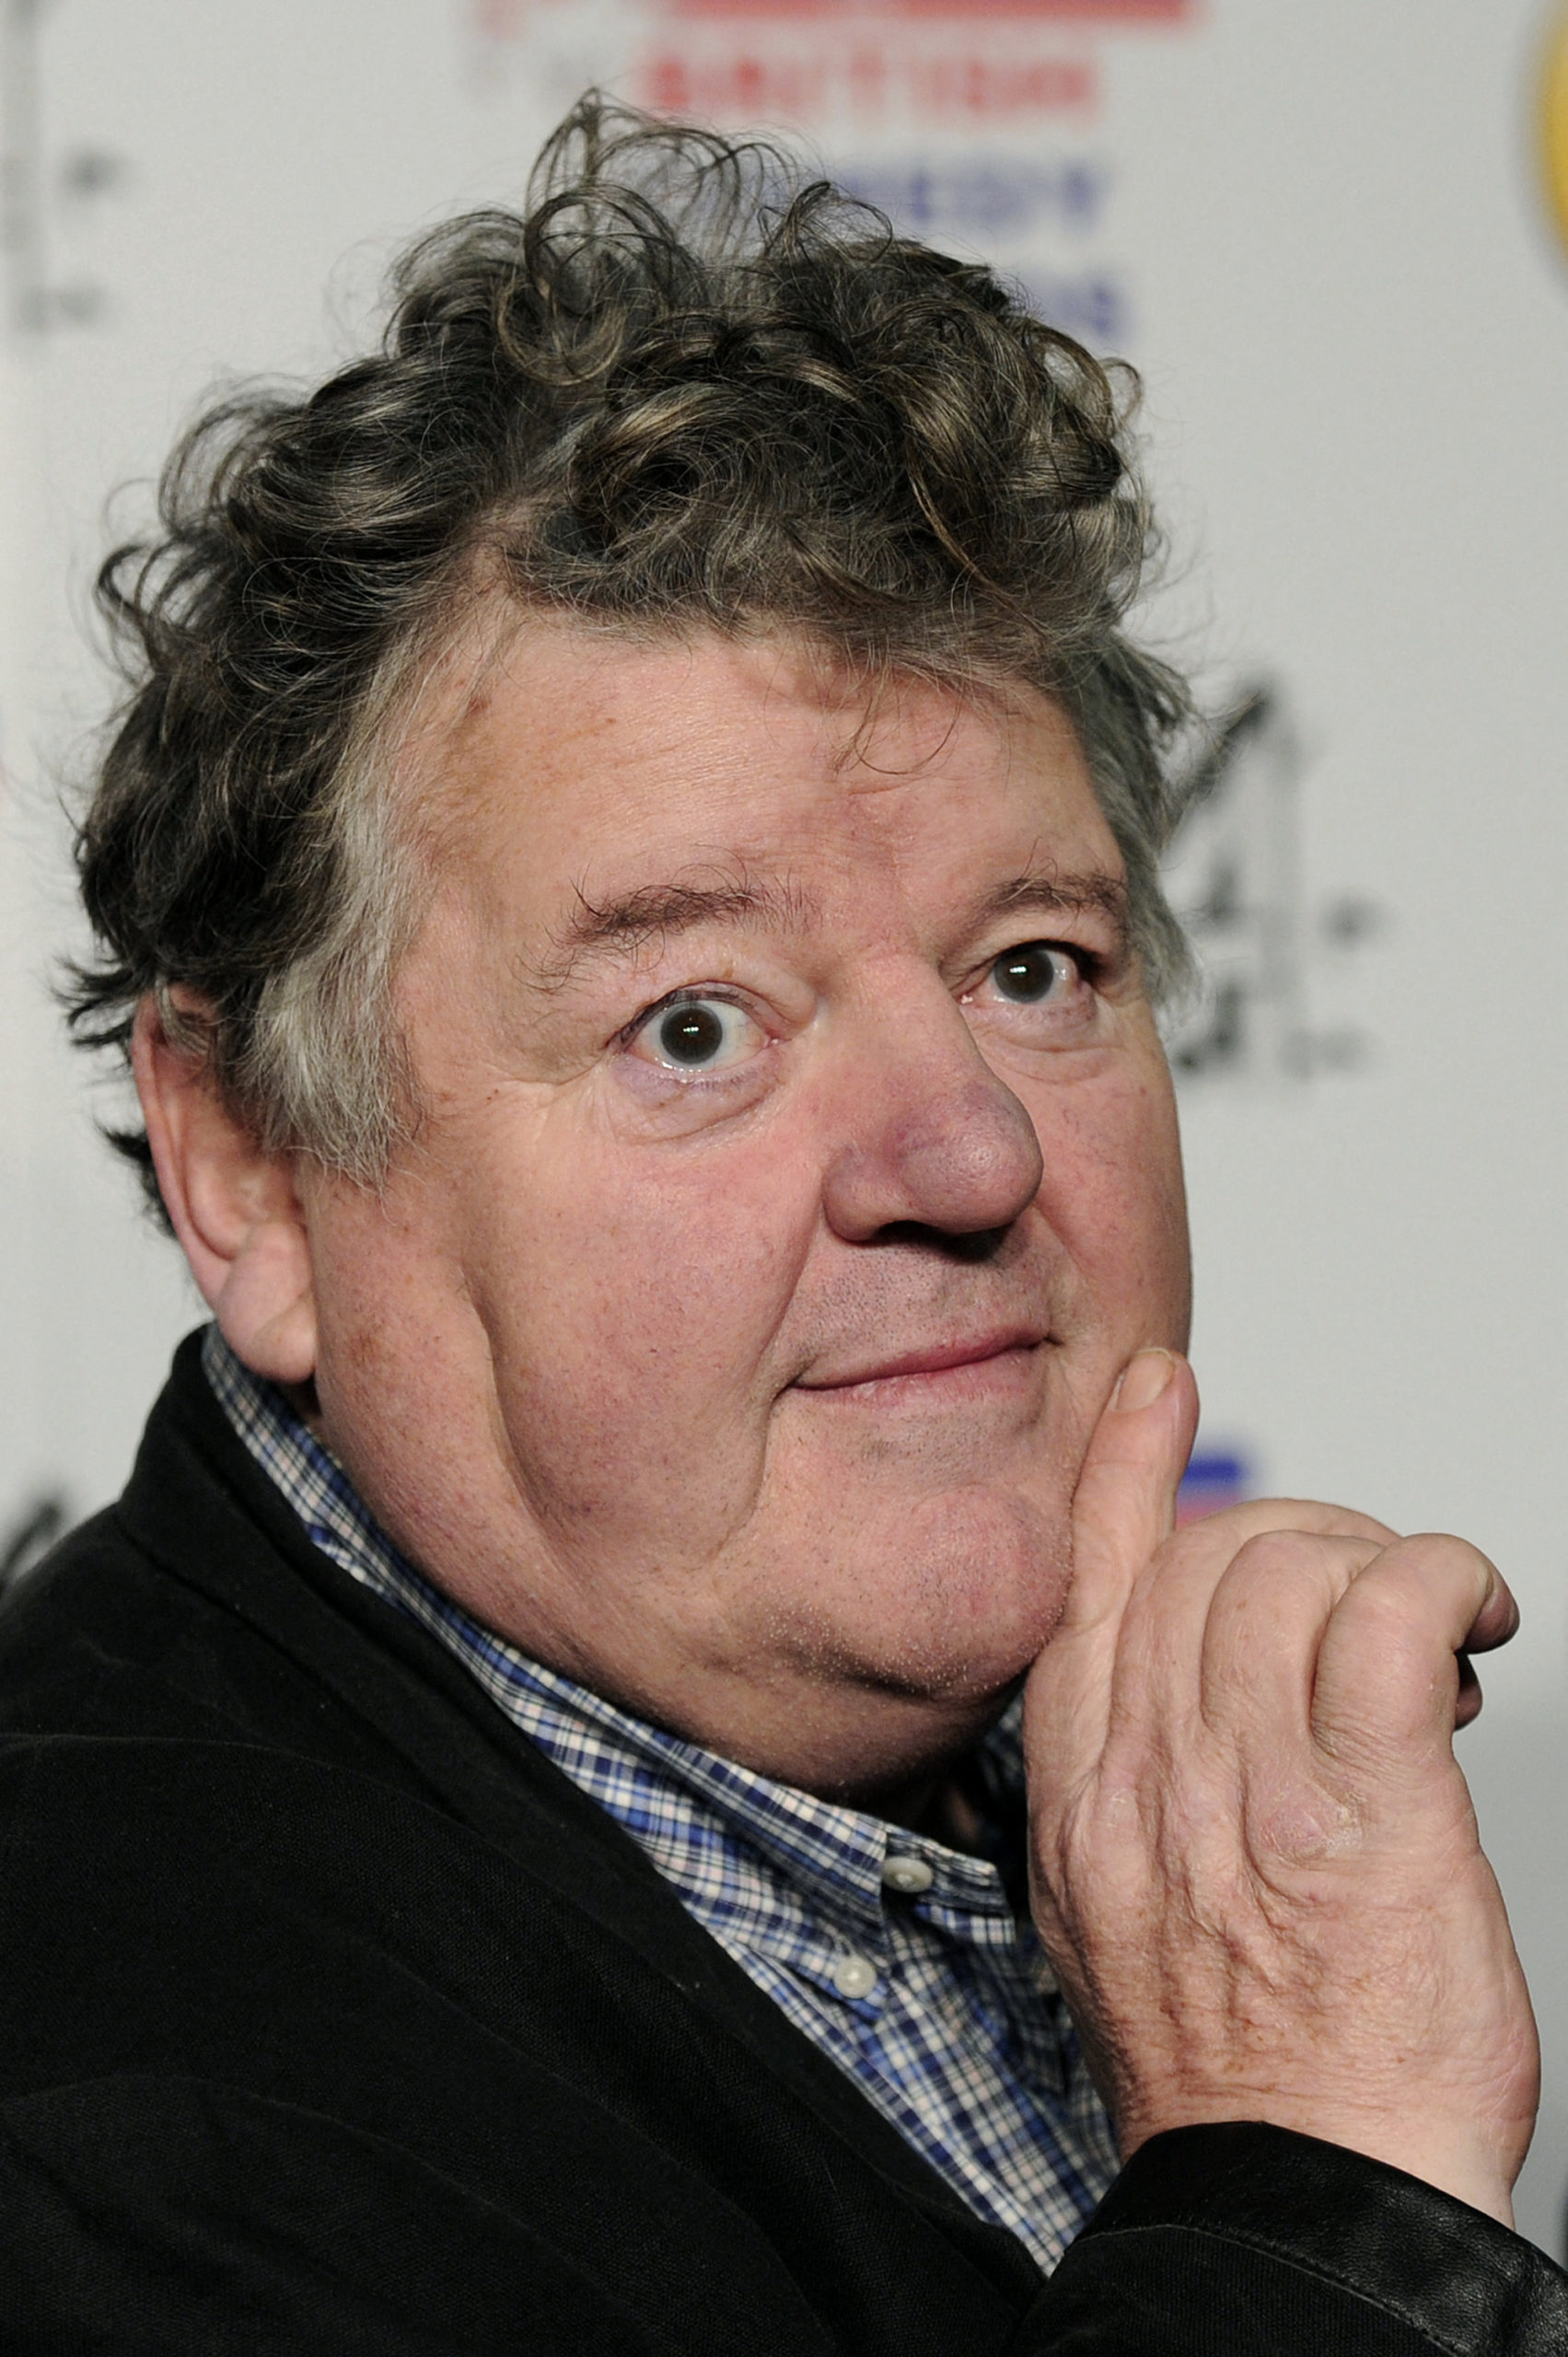 (FILES) In this file photo taken on December 16, 2011 British actor and comedian Robbie Coltrane attends the British Comedy Awards in London. - Scottish actor Robbie Coltrane, who played Hagrid in the Harry Potter films, has died aged 72, his agent said on Friday, October 14. (Photo by CARL COURT / AFP)